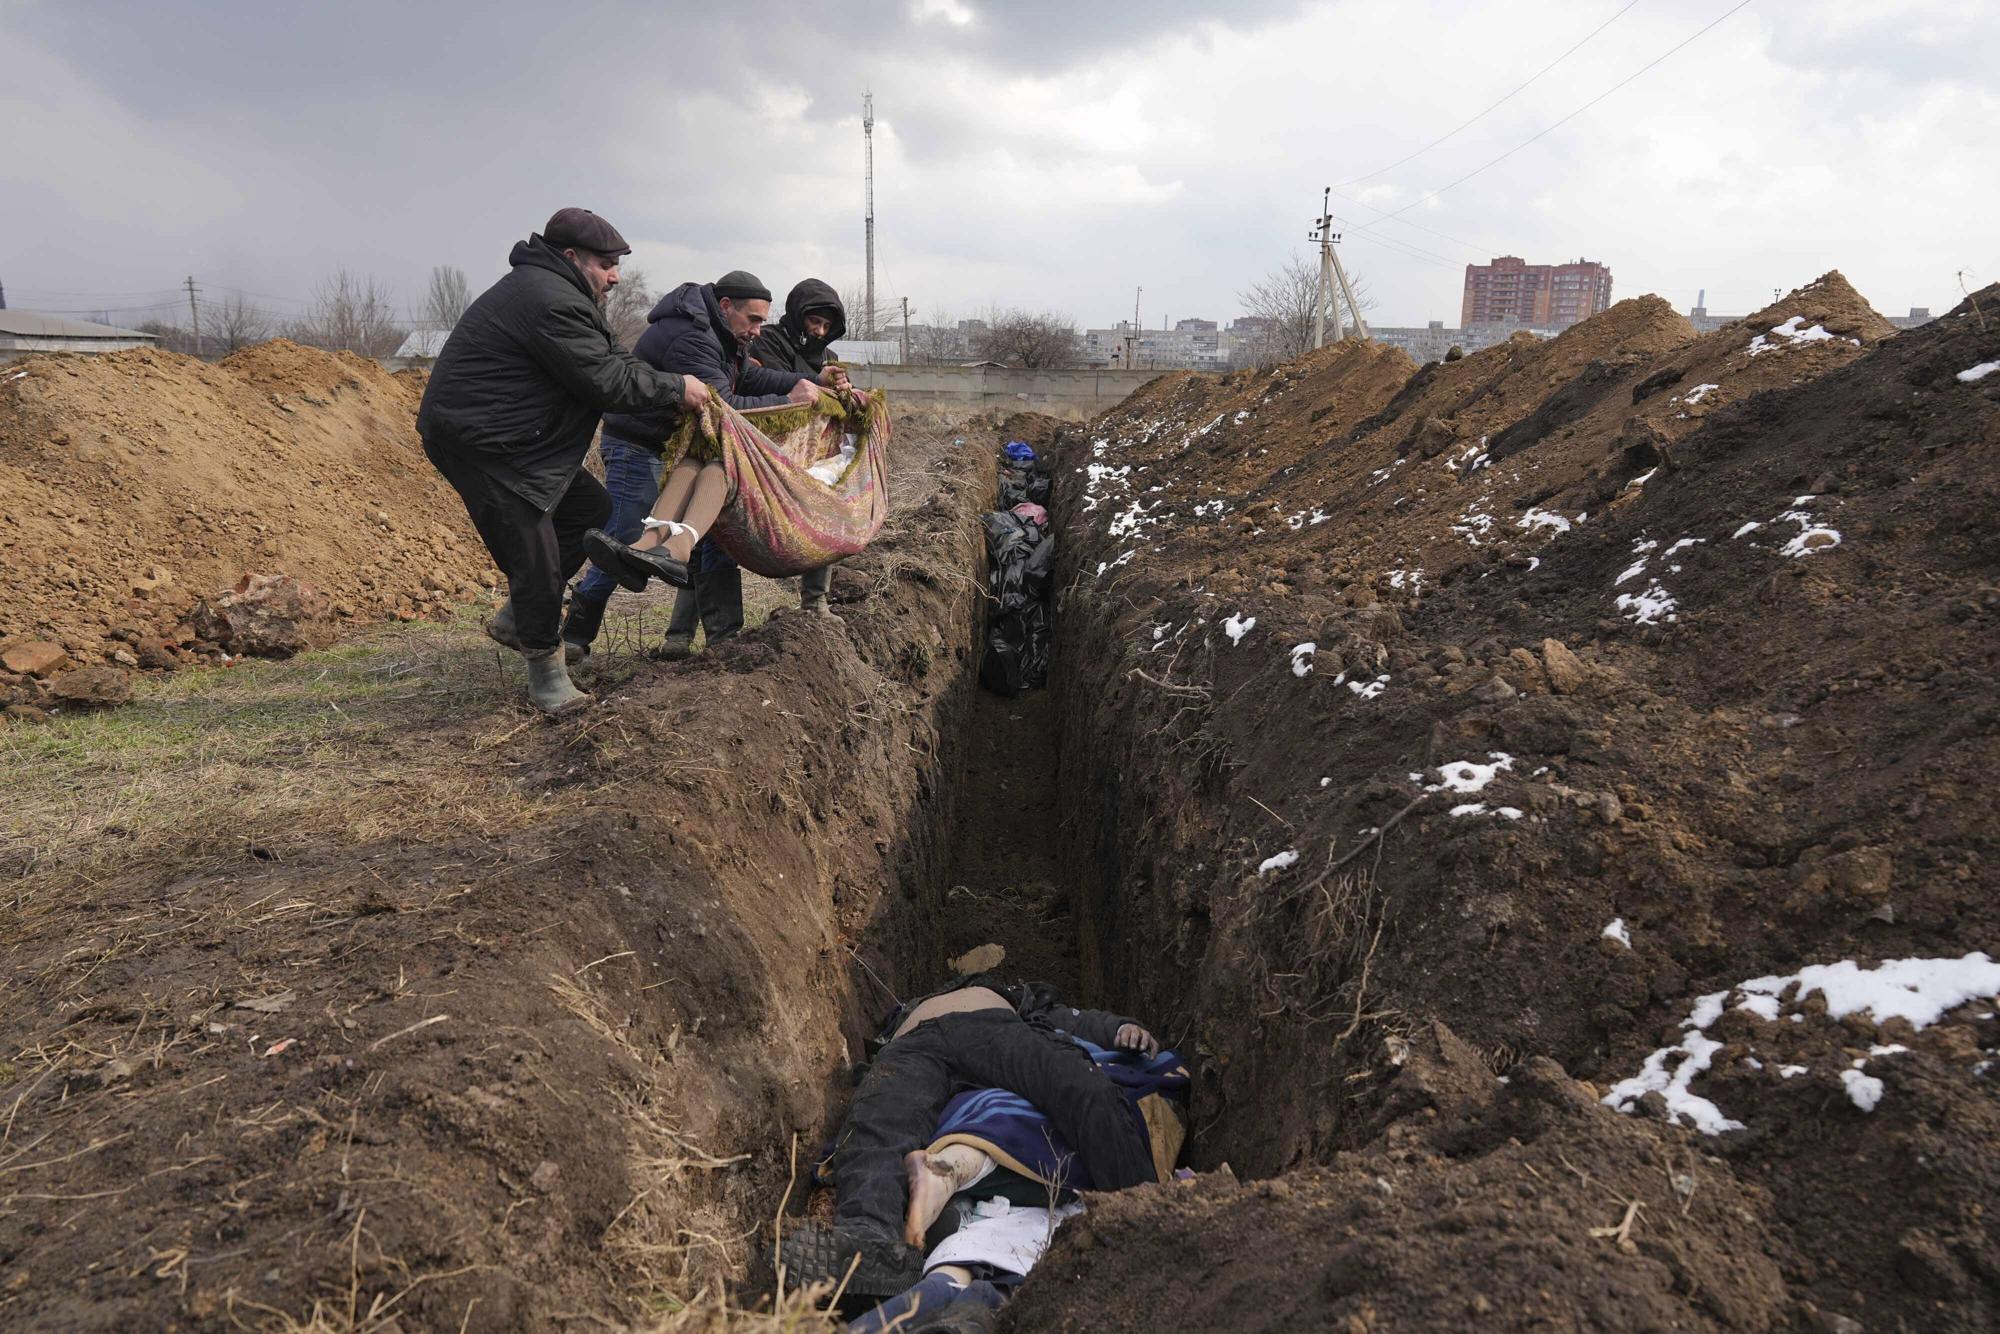 9. Bodies are lowered into a mass grave on the outskirts of Mariupol, Ukraine, on March 9, 2022, as people cannot bury their dead because of the heavy shelling by Russian forces.